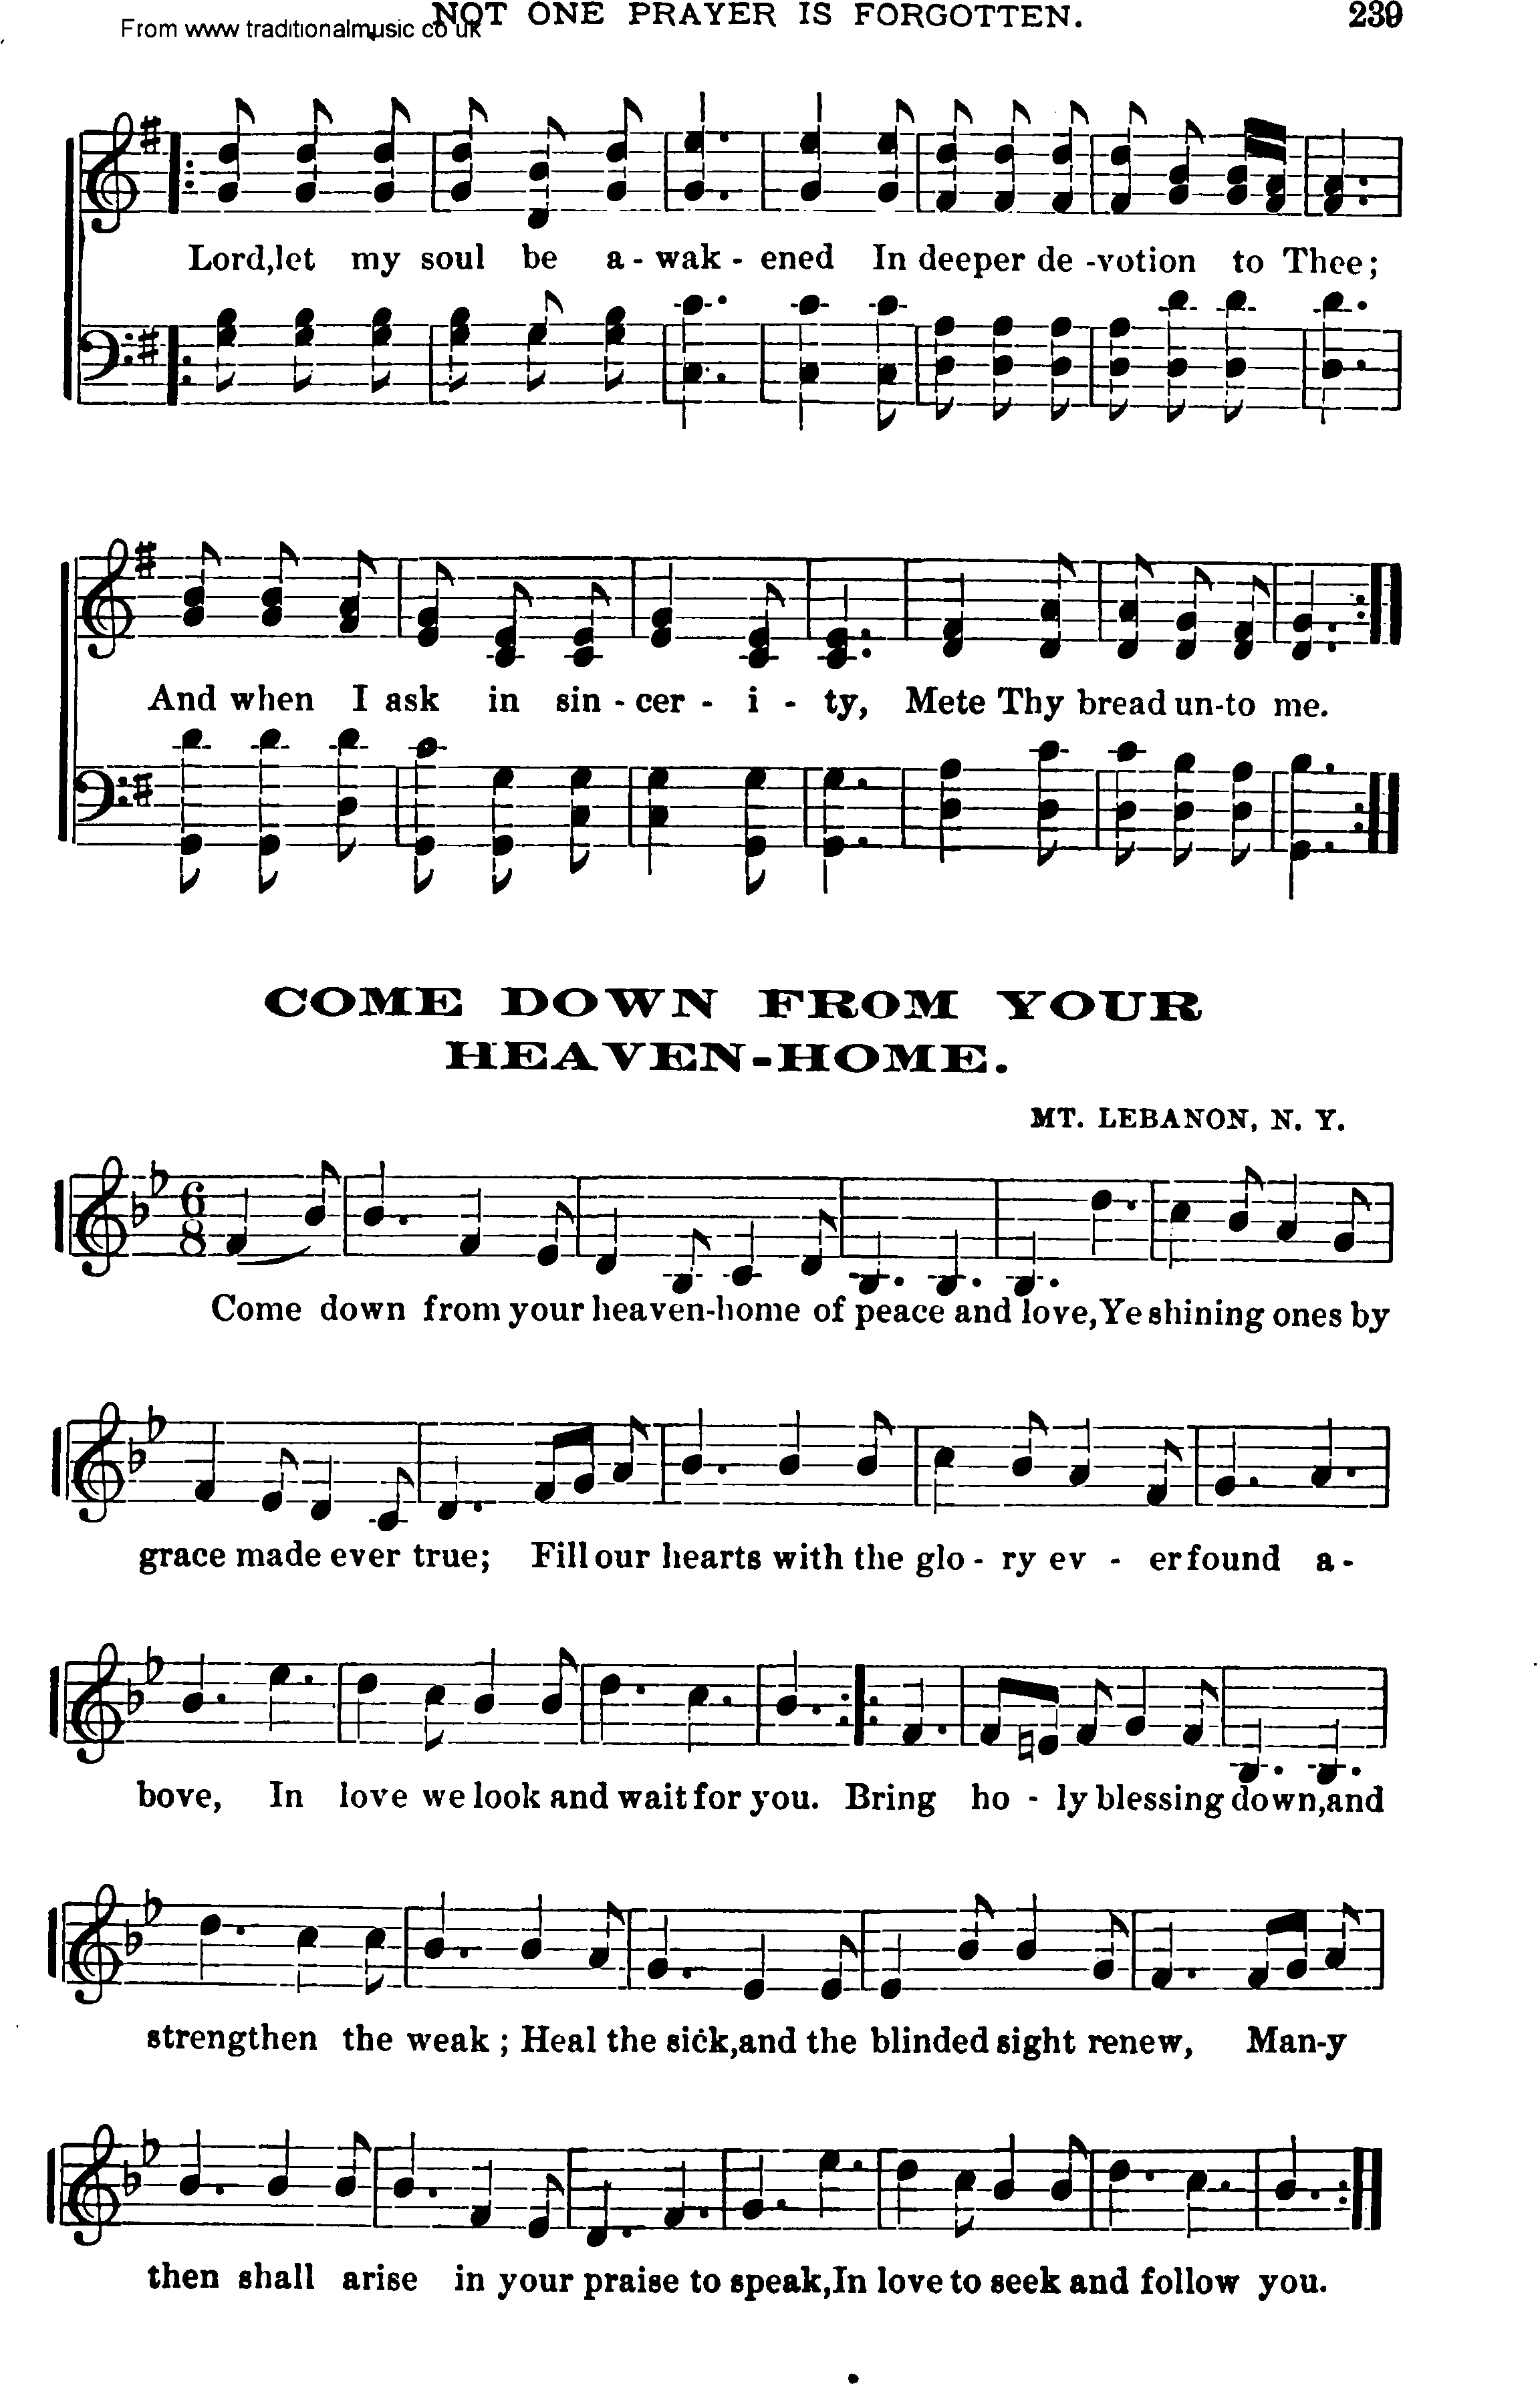 Shaker Music collection, Hymn: Come Down From Your Heaven Home, sheetmusic and PDF